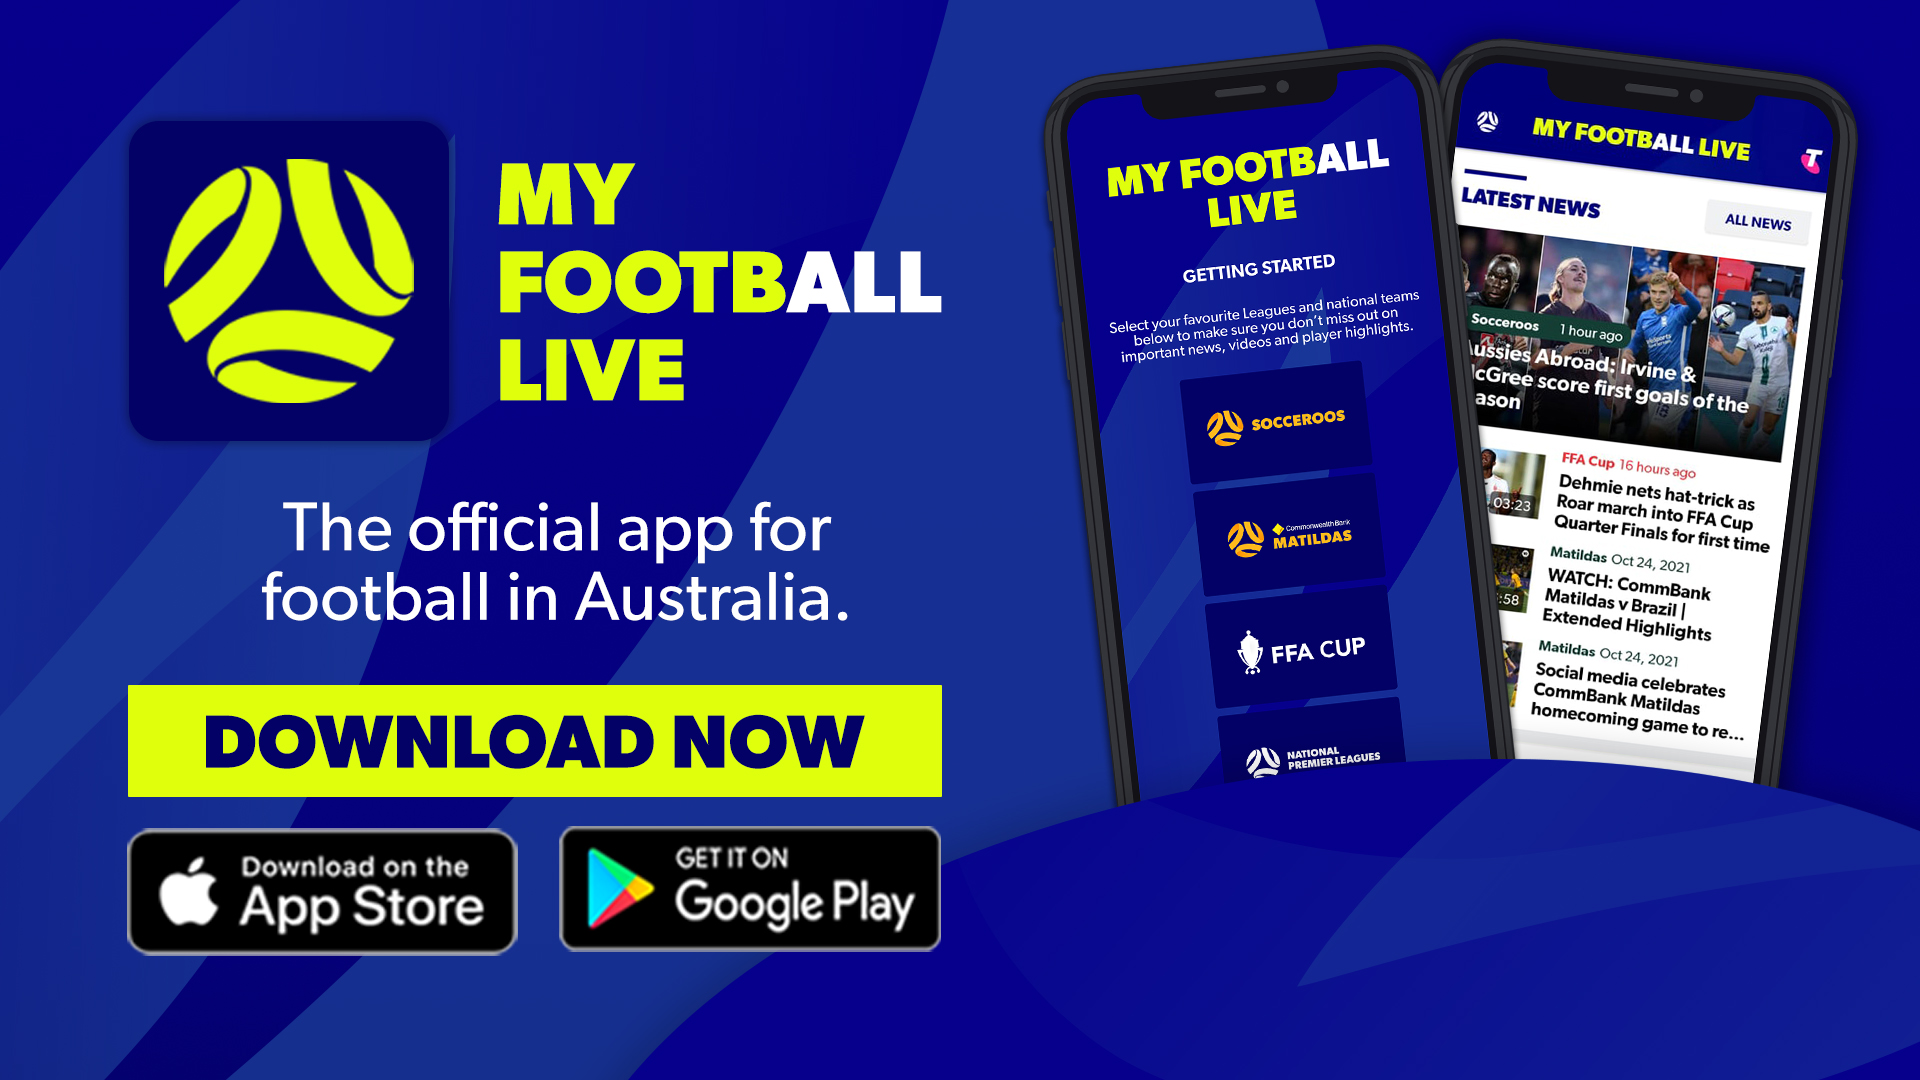 My Football Live app updated